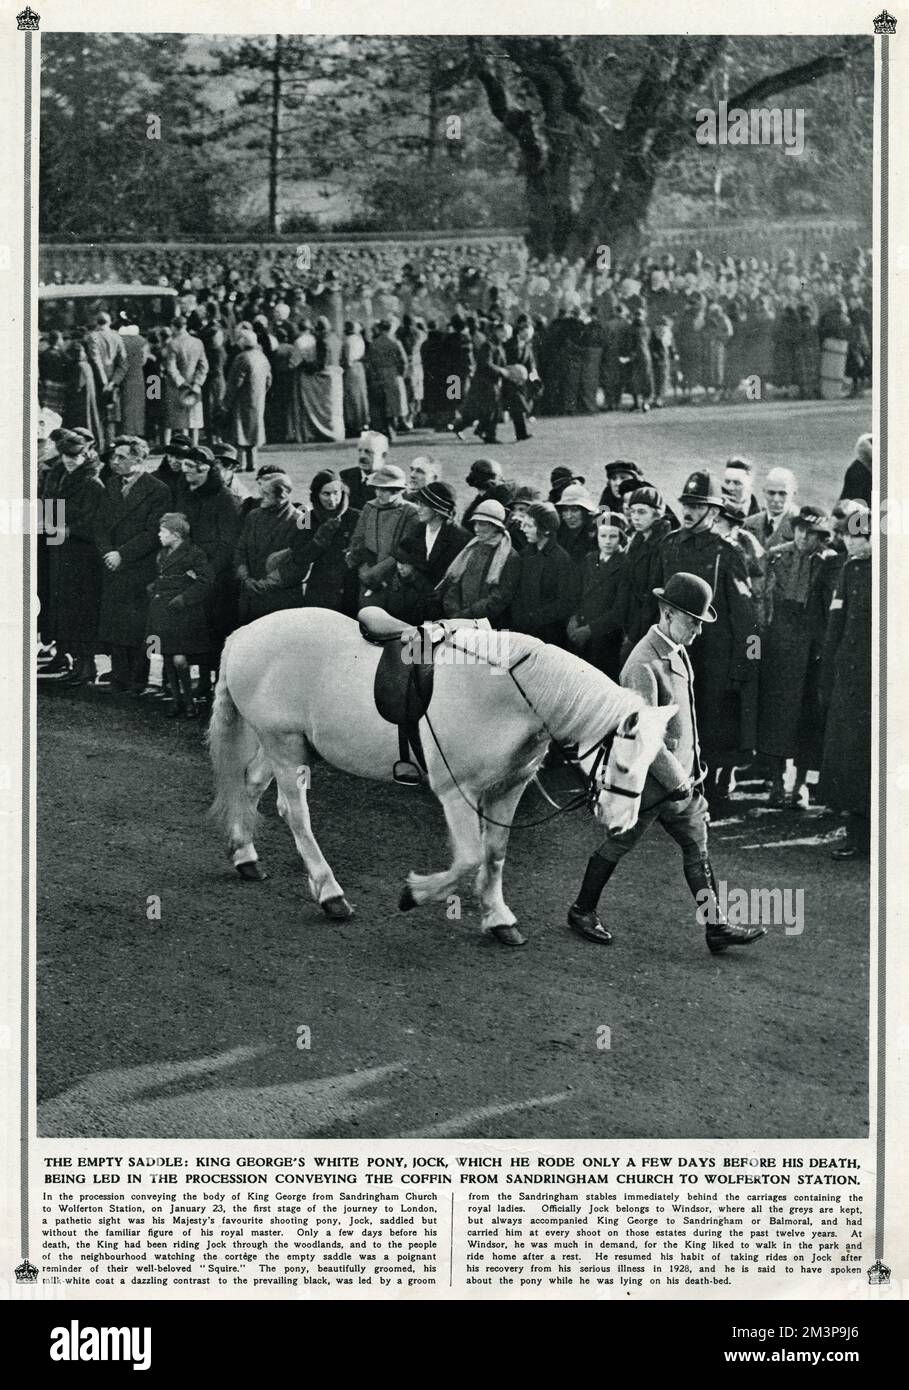 The late King George V's first stage of his journey to London, with his favourite white shooting pony 'Jock', which he rode only a few days before his death being led in procession conveying the coffin from Sandringham Church to Wolferton Station.     Date: 23 January 1936 Stock Photo